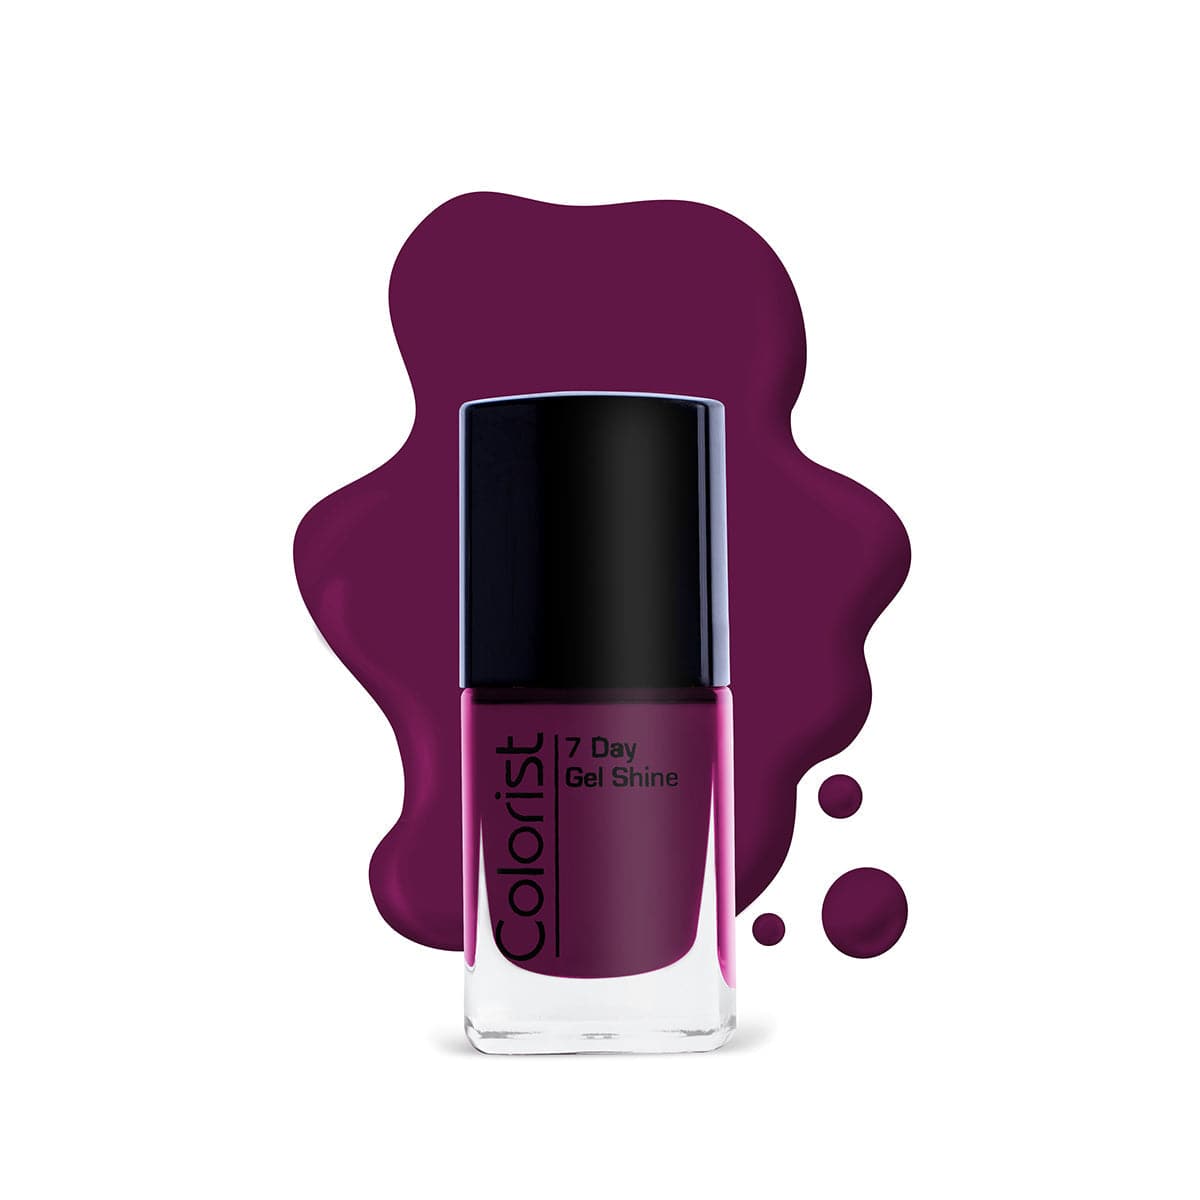 ST London Colorist Nail Paint - St063 Pewter - Premium Health & Beauty from St London - Just Rs 330.00! Shop now at Cozmetica